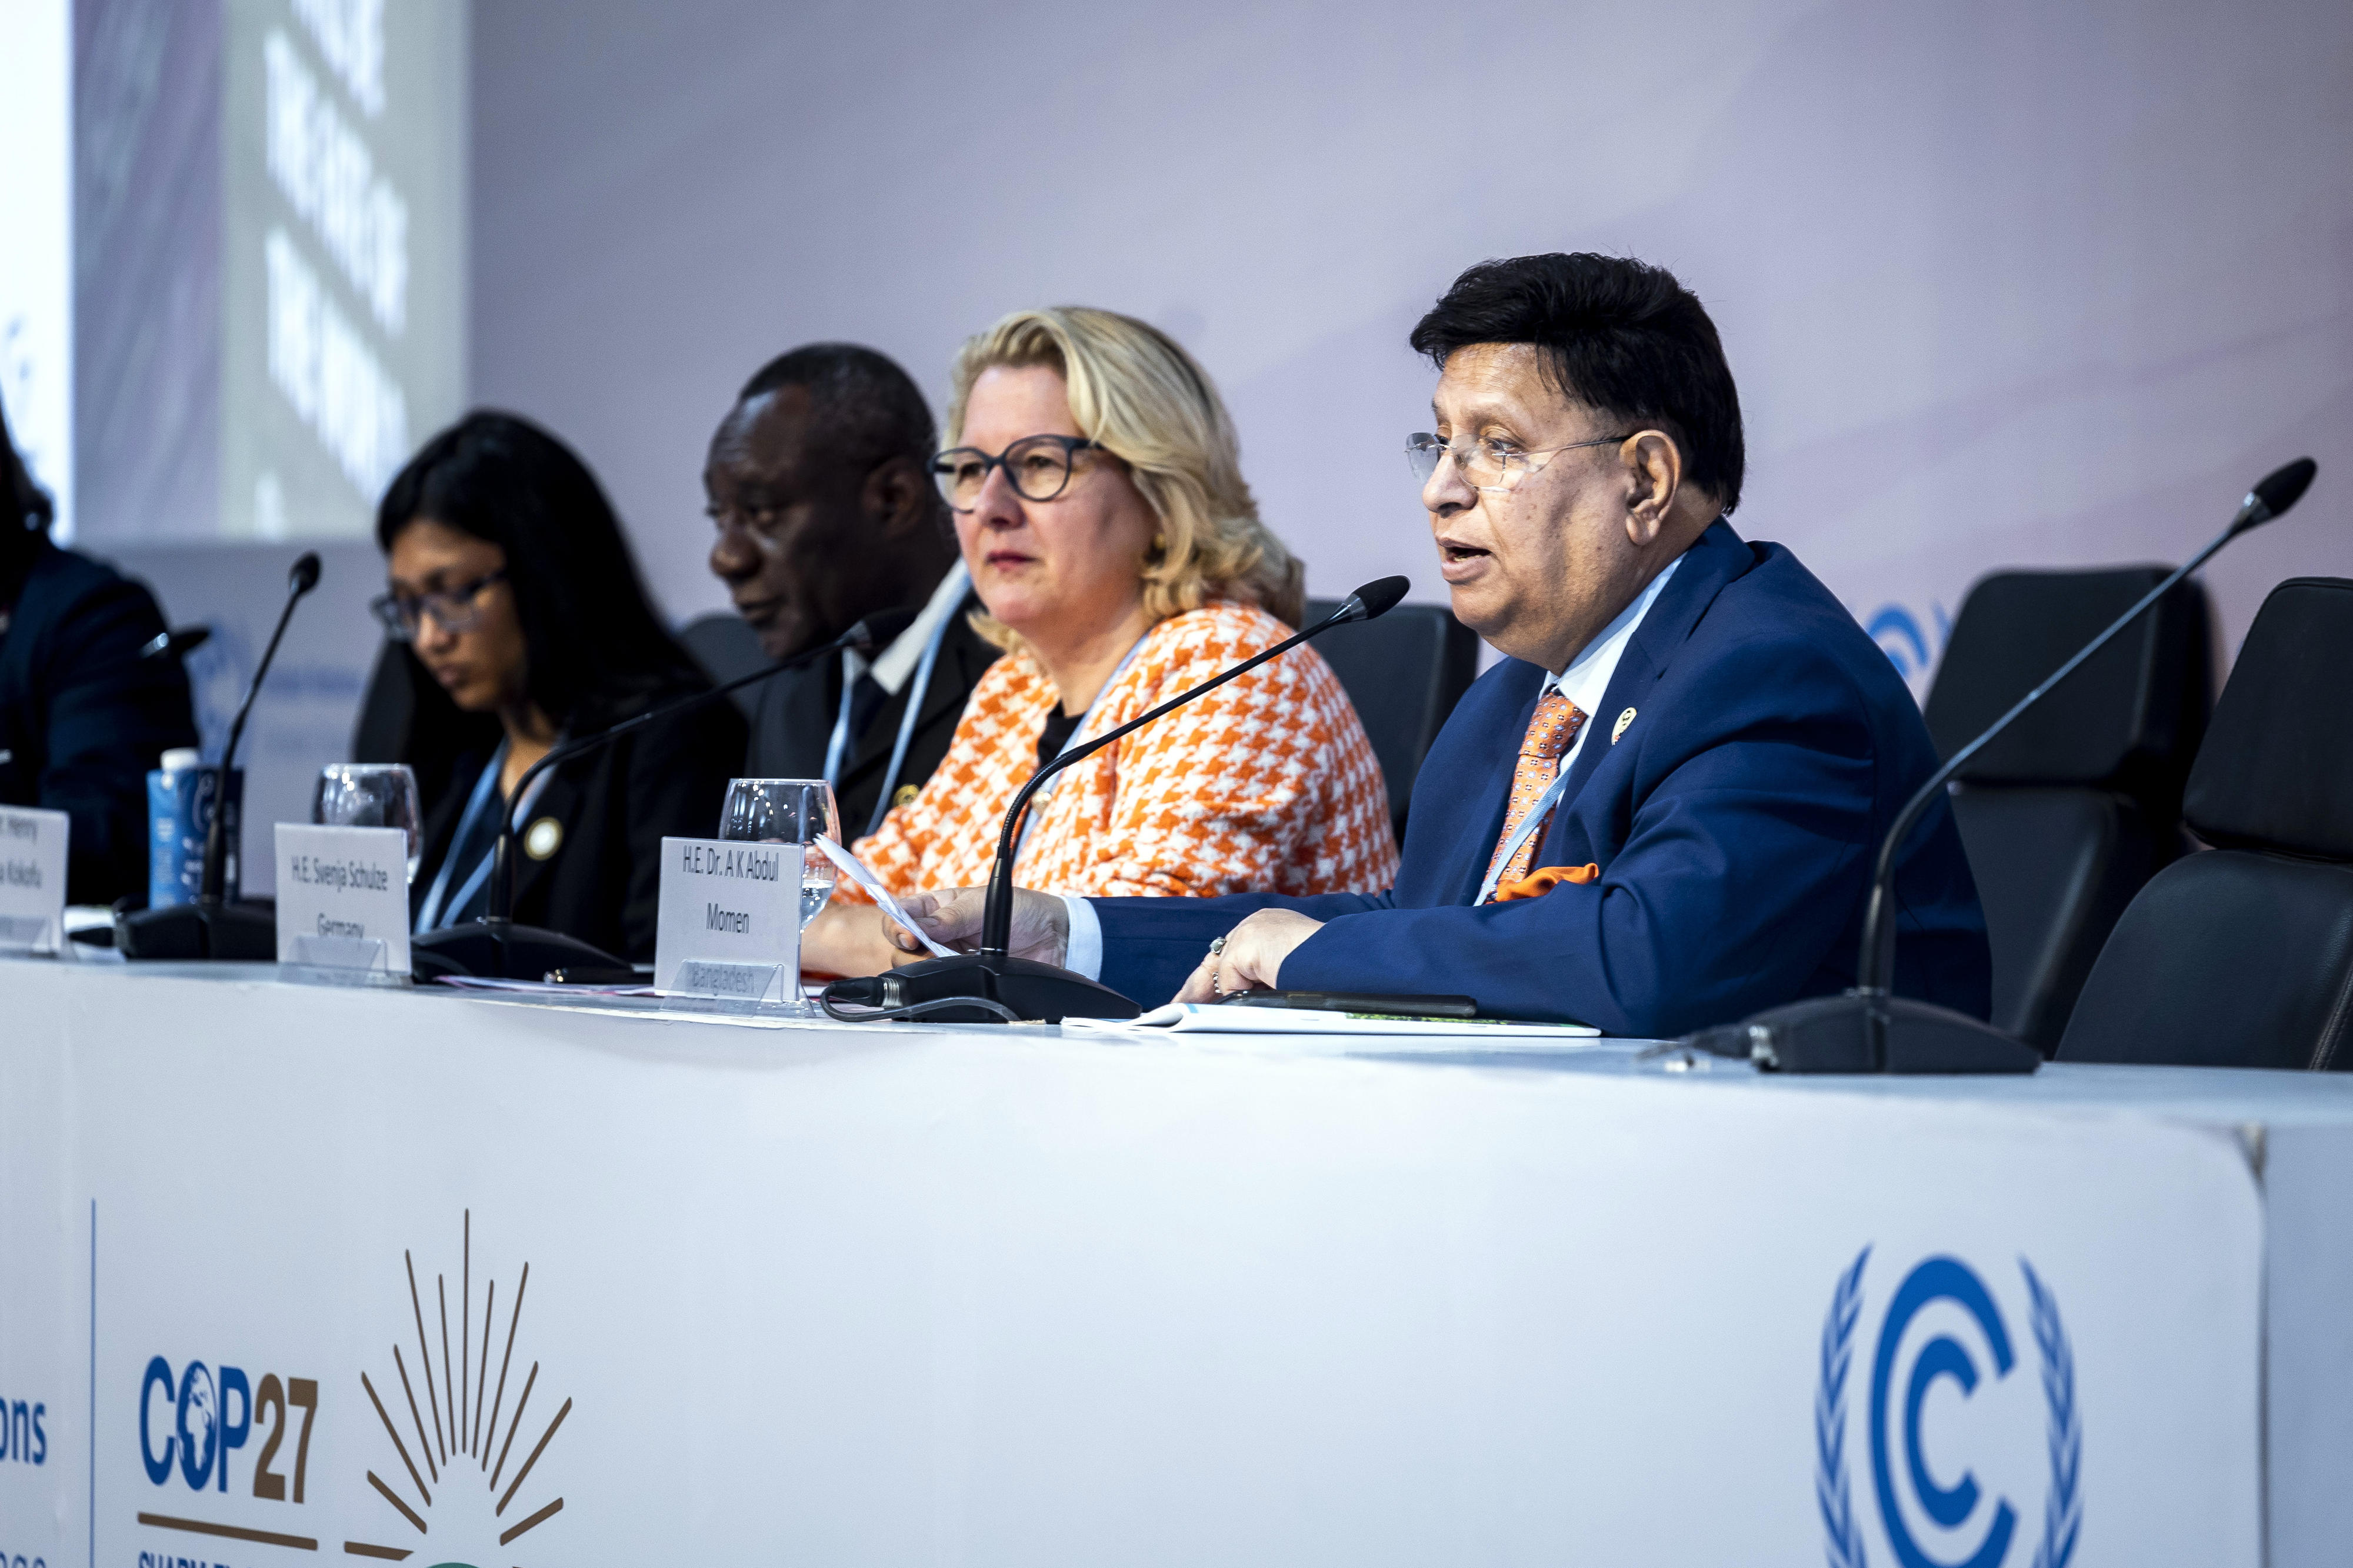 Foreign Minister of Bangladesh, Abdul Momen, participating at a press conference to launch the Global Shield against Climate Risks at COP27, together with Sara Ahmed of the V20, Henry Kokofu, Special Envoy of the Climate Vulnerable Forum (CVF) Ghana Presidency, and Federal Minister for Economic Cooperation and Development, Svenja Schulze, Foreign Minister of Bangladesh, Abdul Momen